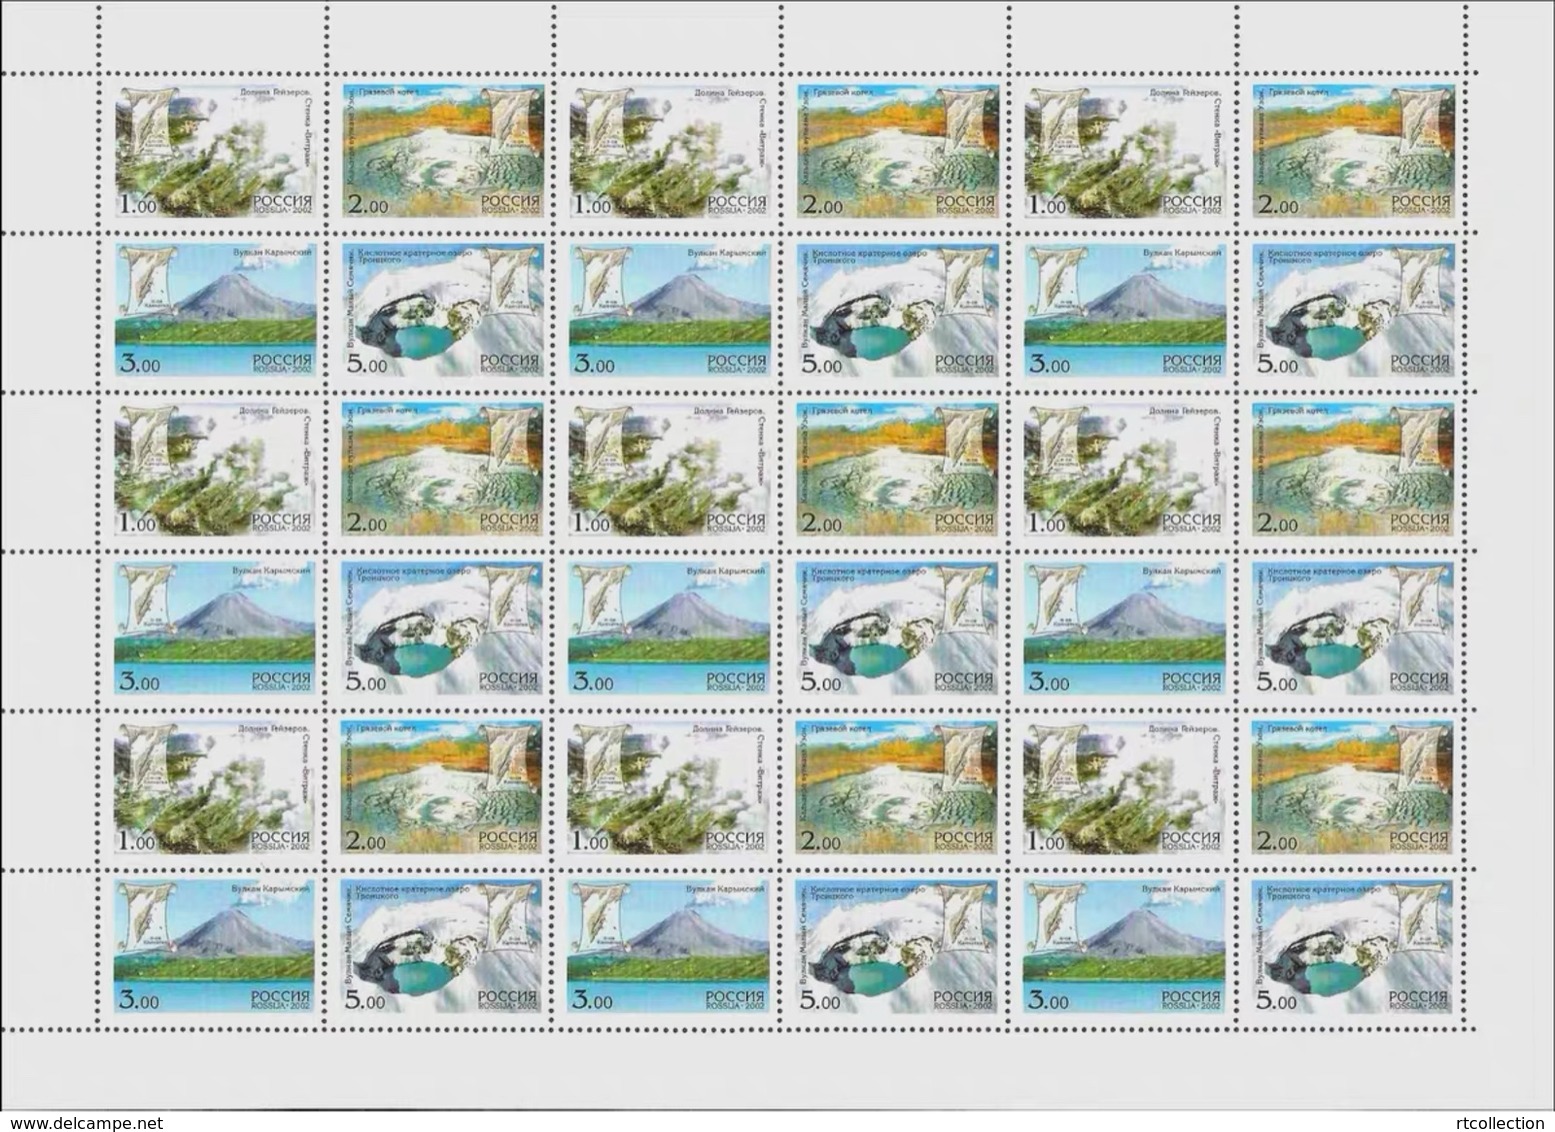 Russia 2002 Sheet Volcanoes Of Kamchatka Mountains Lake Environment Nature Regions Places Stamps MNH Mi 990-993 - Hojas Completas